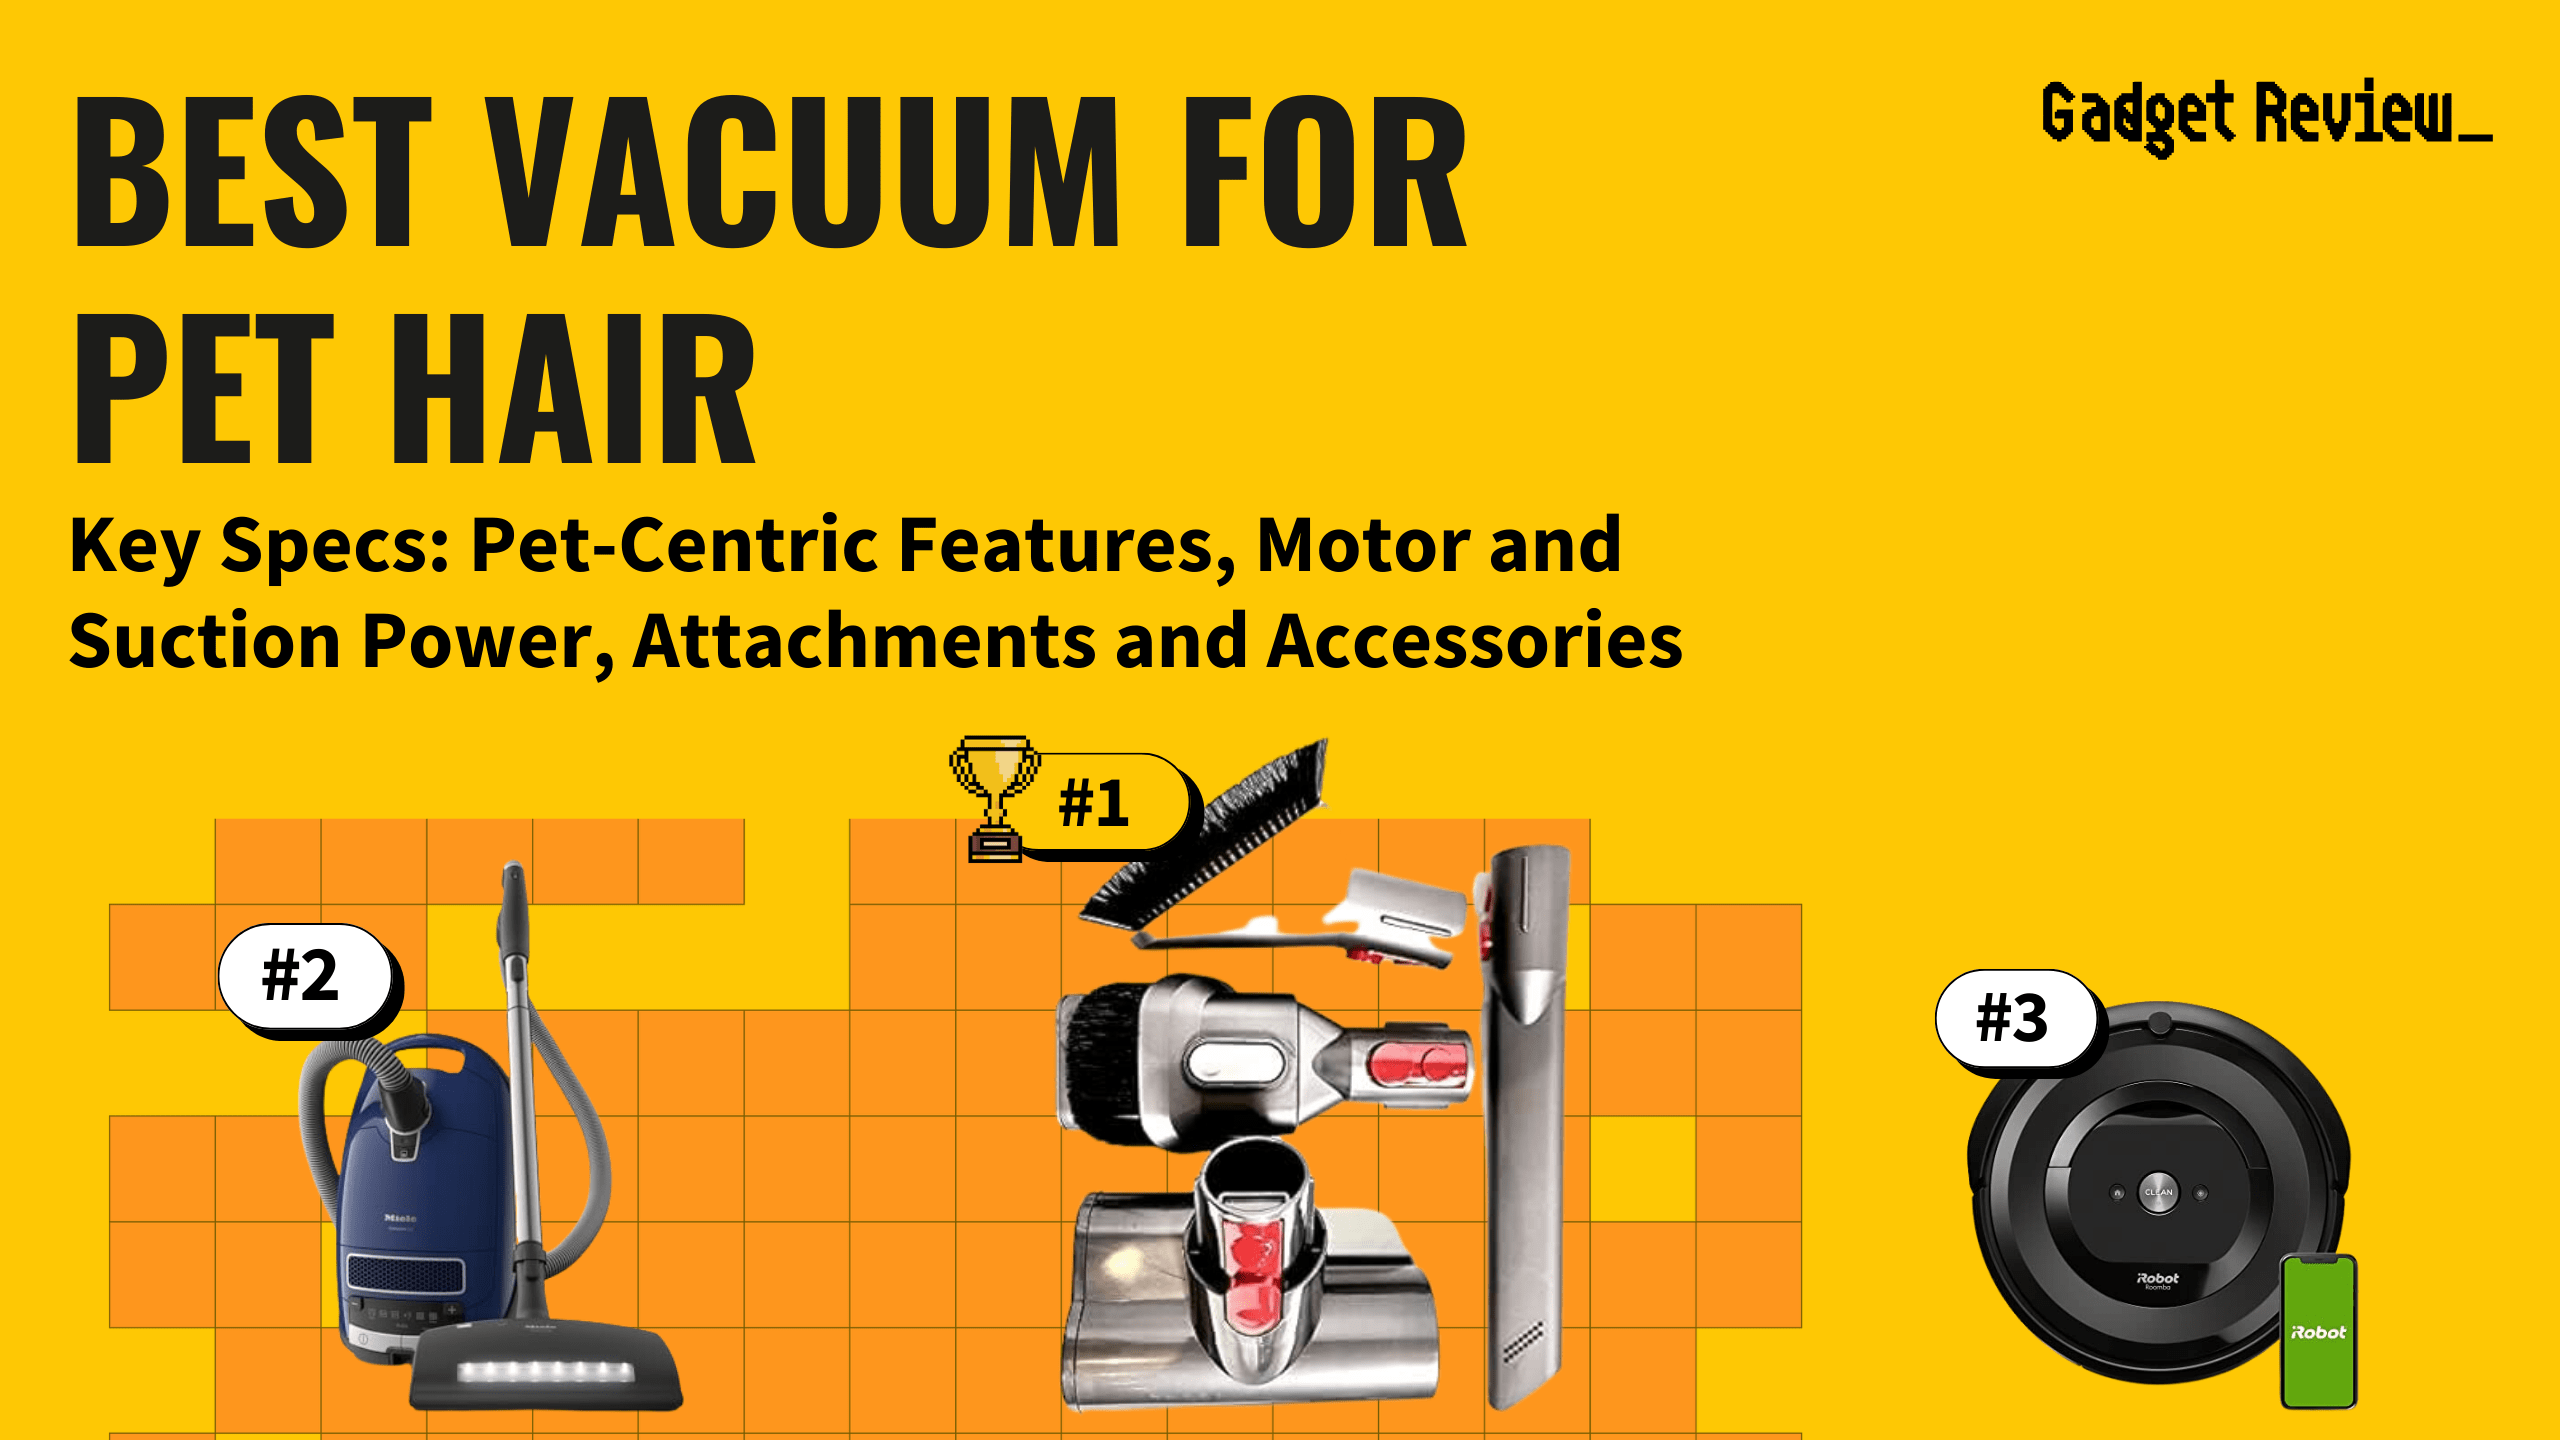 best vacuums for pet hair guide that shows the top best vacuum cleaner model